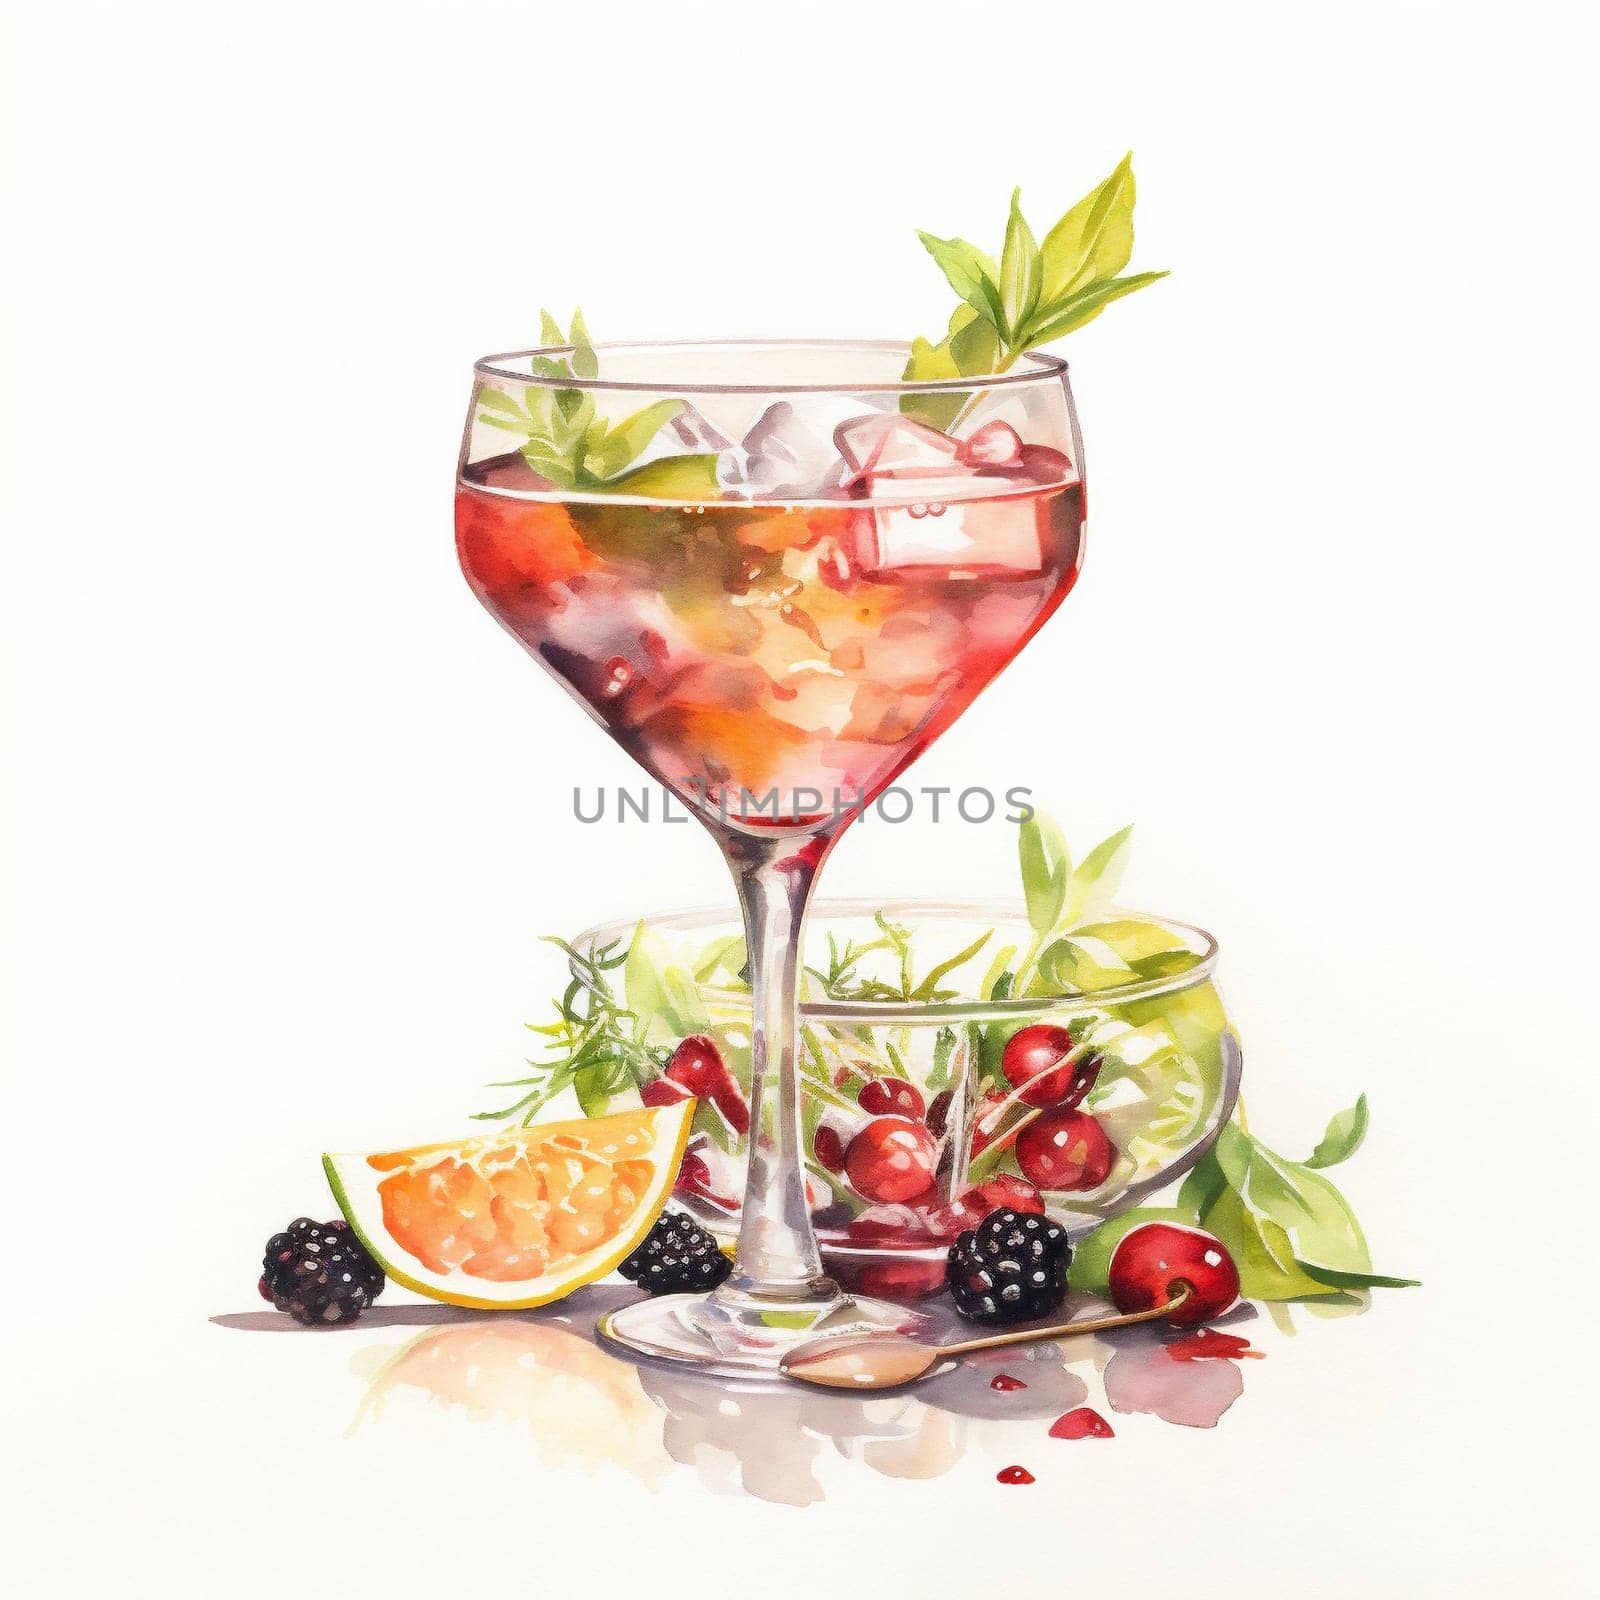 Cocktail Day with Berries, Fruits and Mint Leaves. by Rina_Dozornaya